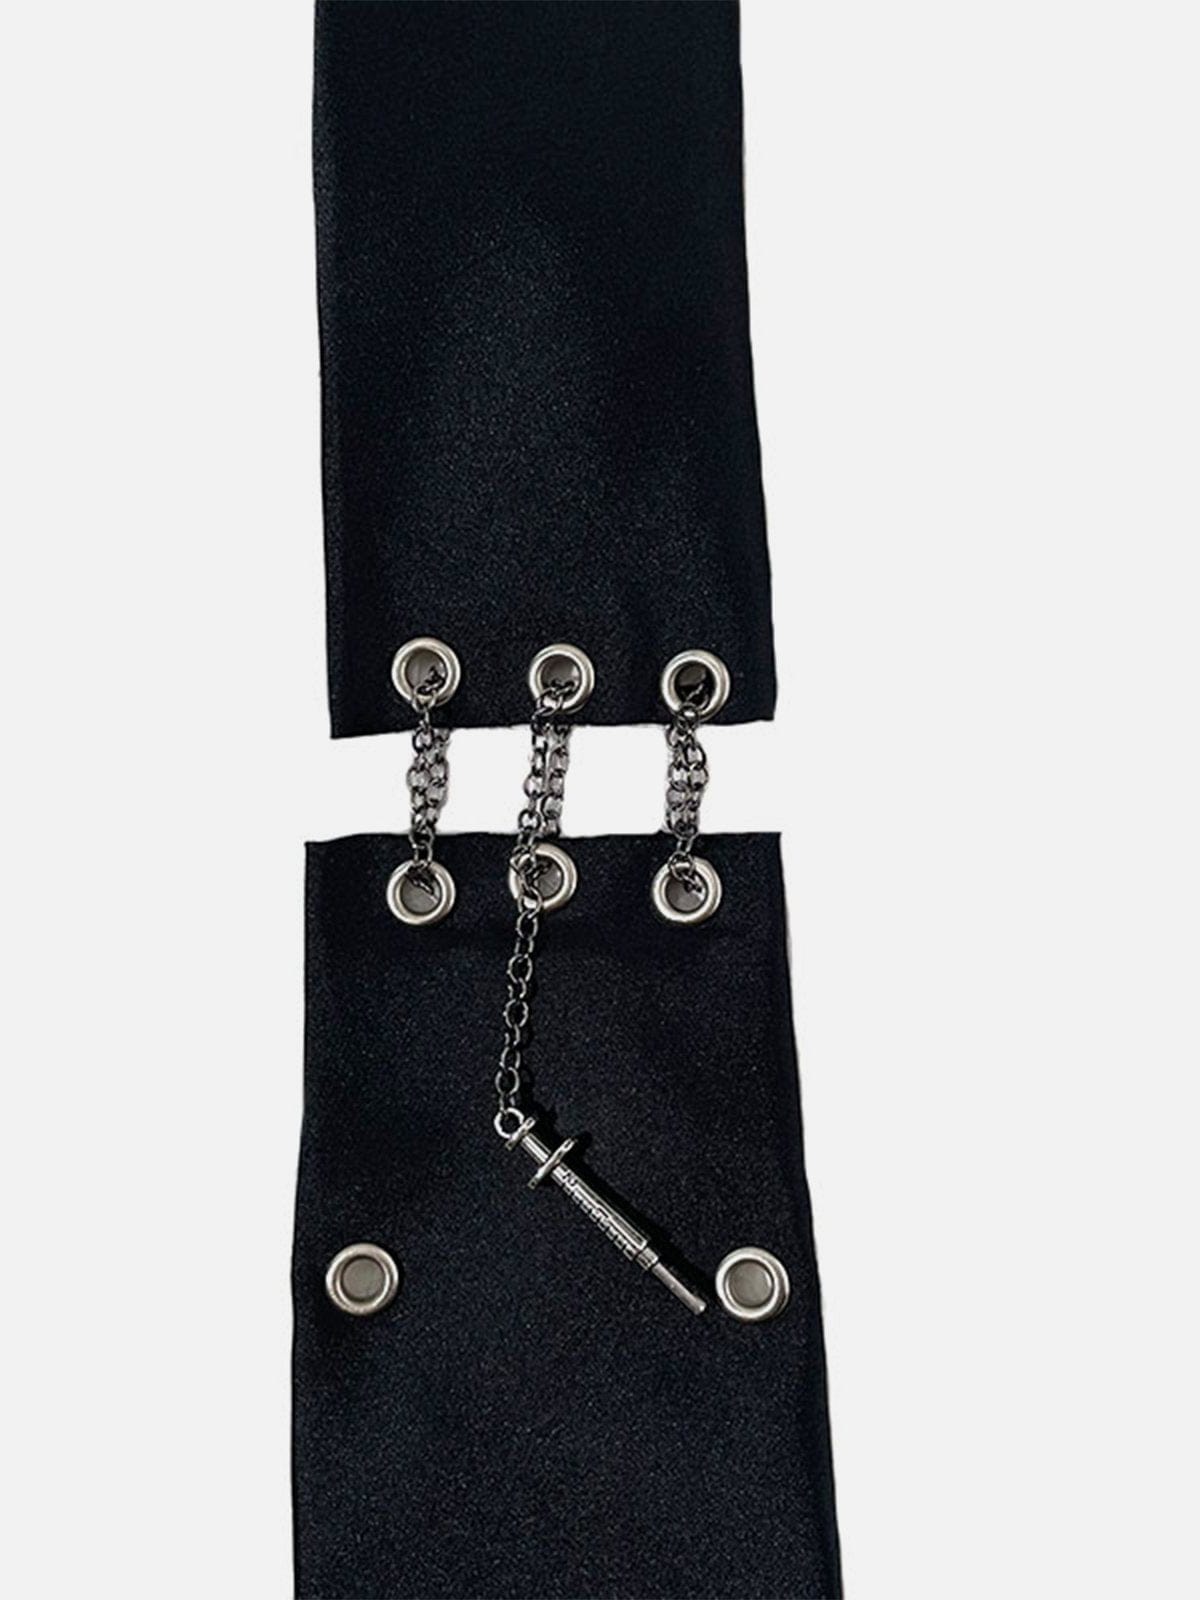 NEV Chain Connection Punk Tie